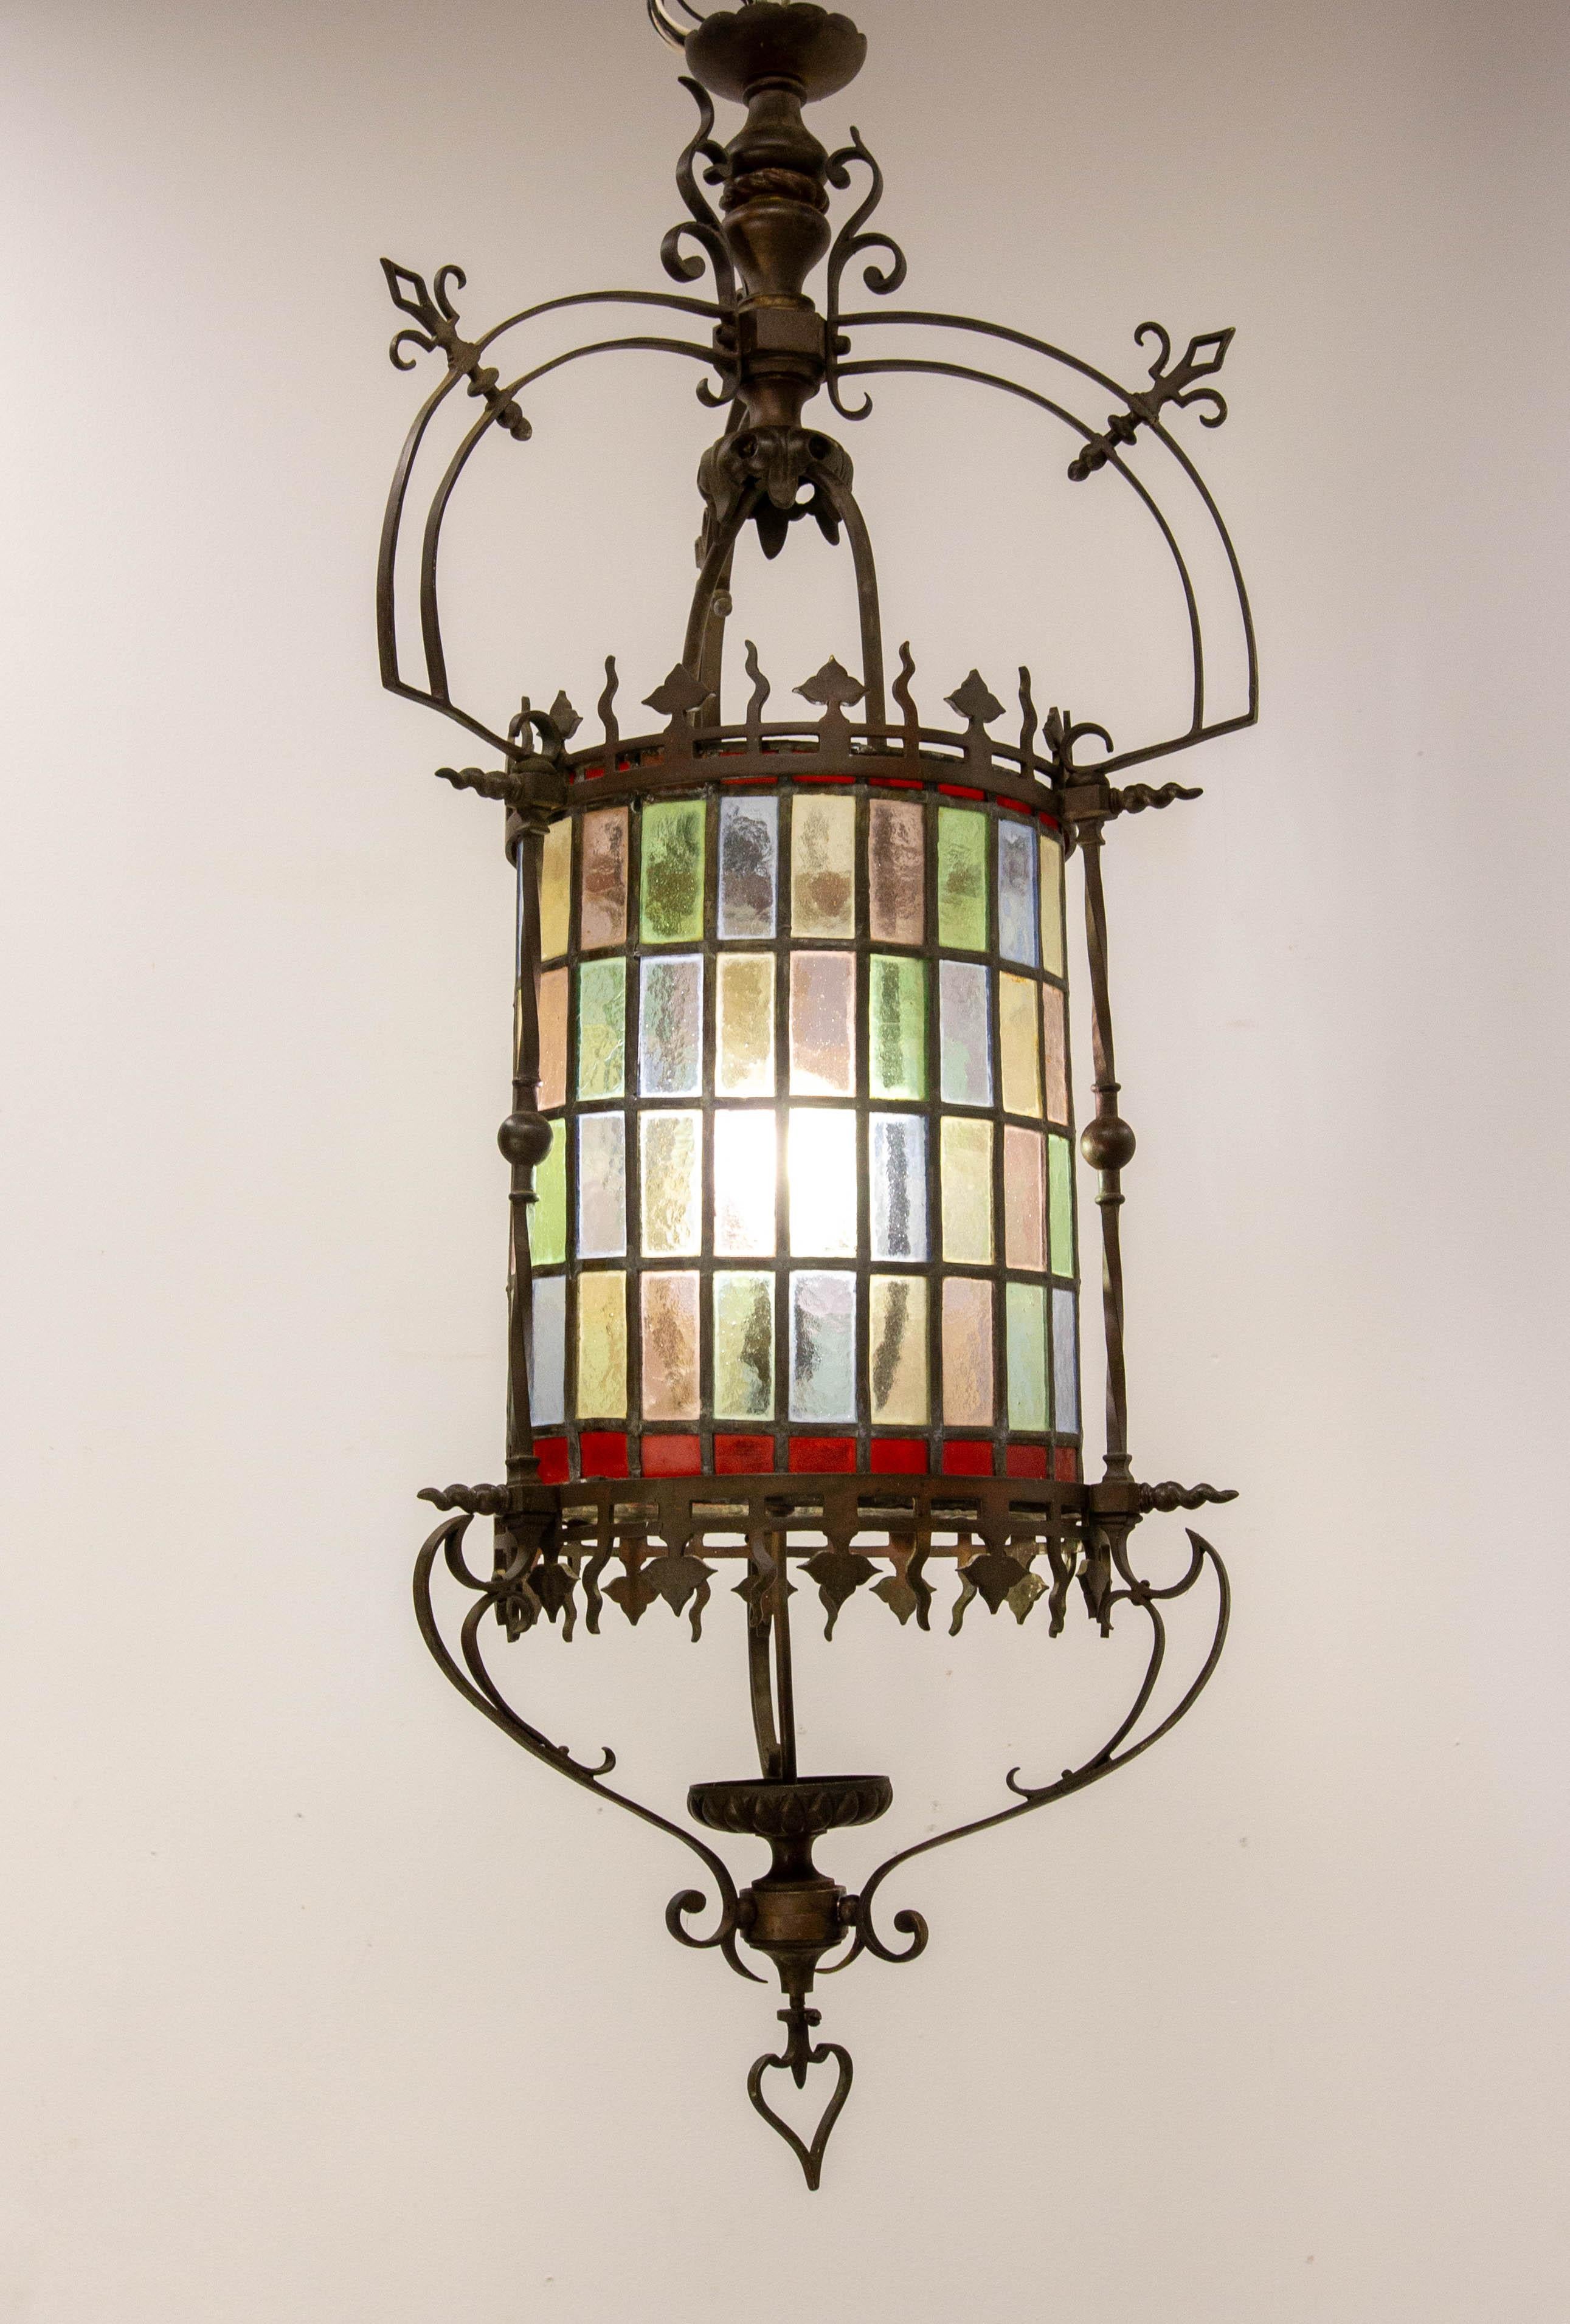 Art Nouveau chandelier or lustre, French
Colored glass and bronze
Made in the late 19 th century, it is a luminaire designed to operate on gas which has been electrified in the 20th century.
Good condition, some welding was done to repair the